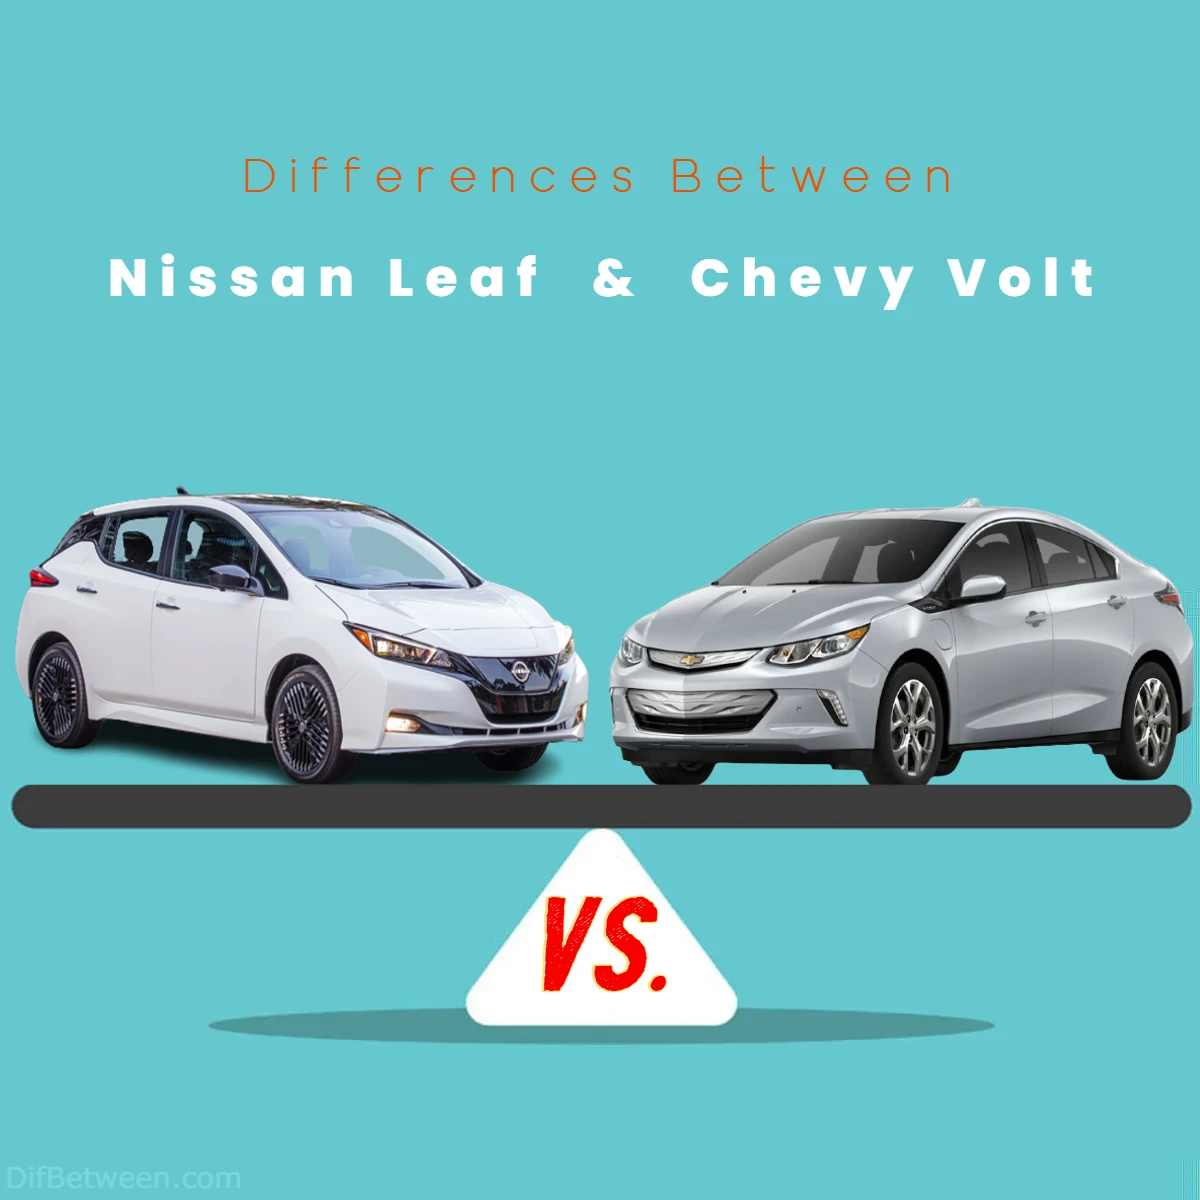 Differences Between Nissan Leaf vs Chevy Volt